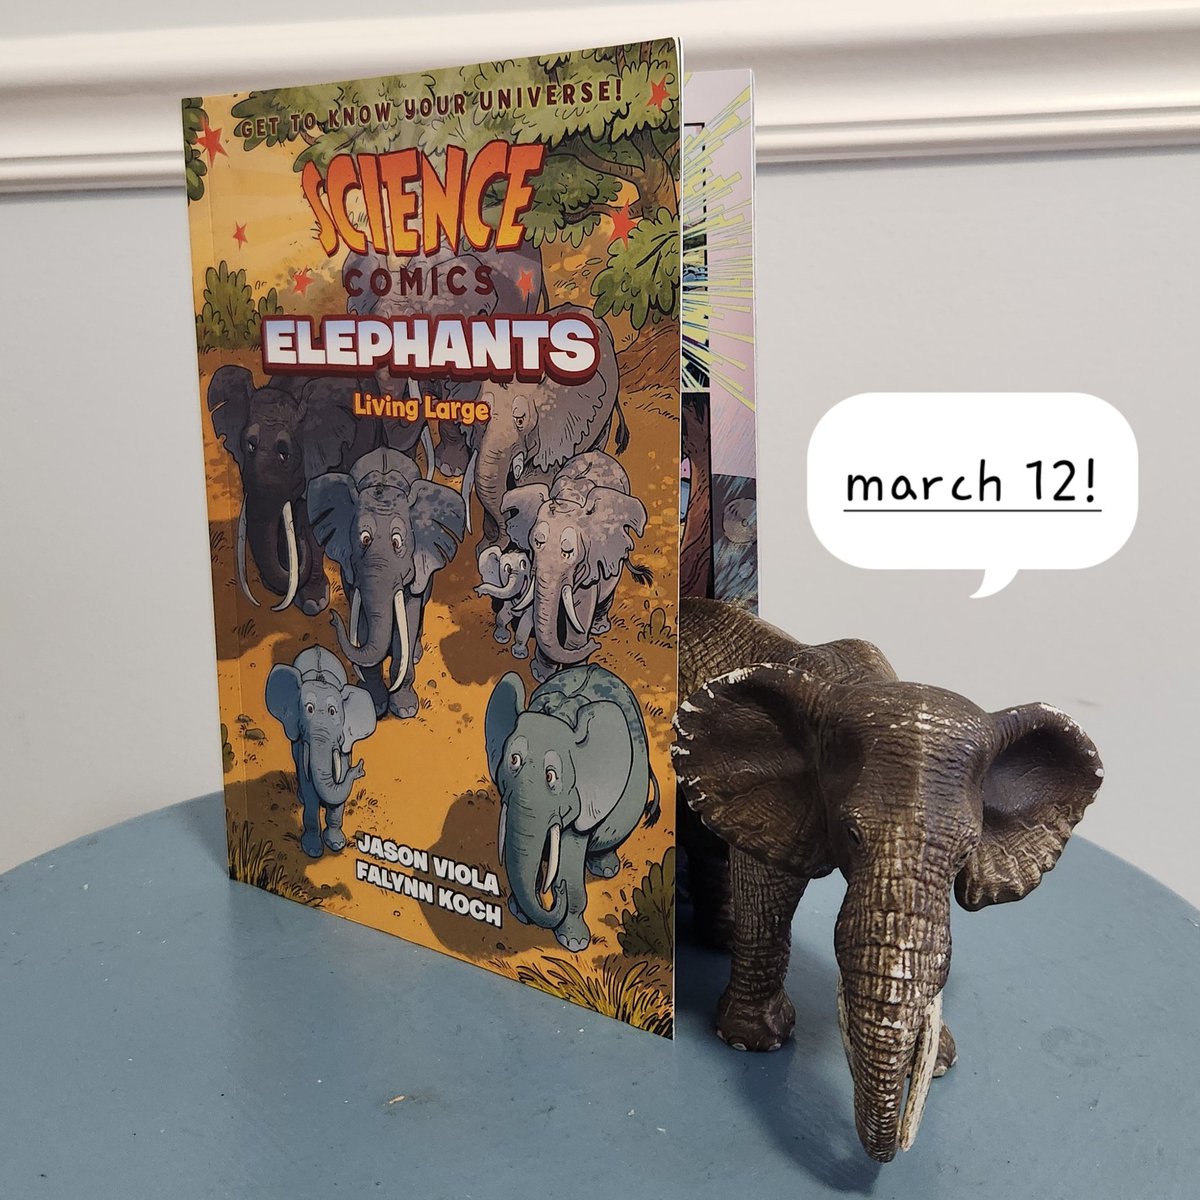 Falynn Koch and I have a new book coming out in 28 days that is ALL ABOUT ELEPHANTS! I loved writing this book and remain in love with the alternately gorgeous and hilarious art by @FalynnK - we can't wait for you to read it! 🐘 #elephants #sciencecomics